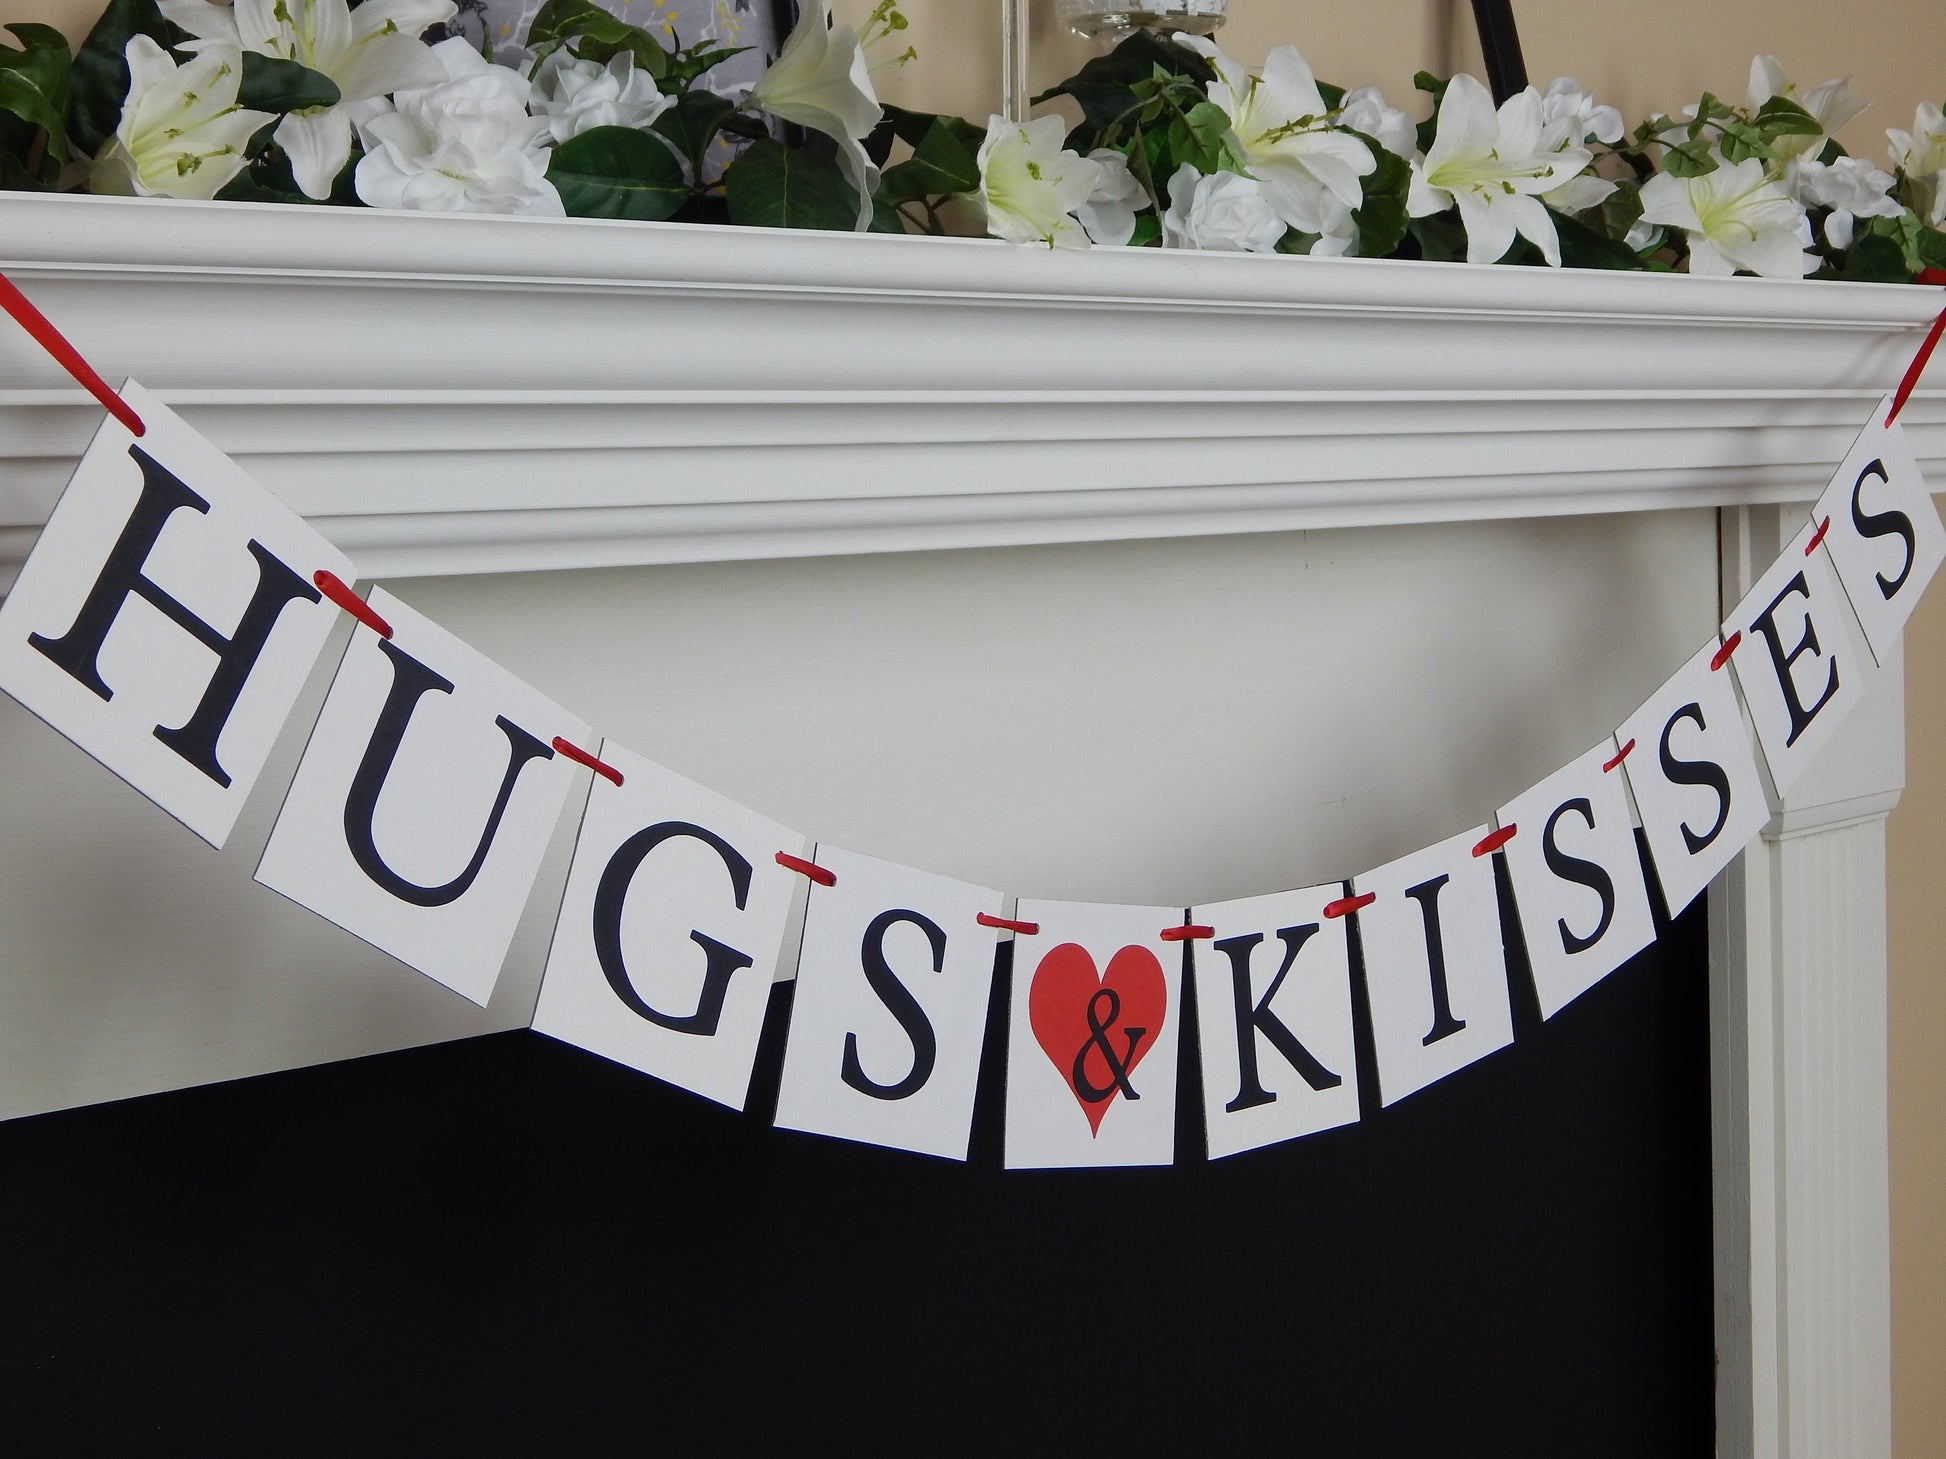 hugs & kisses banner - valentines day decorations